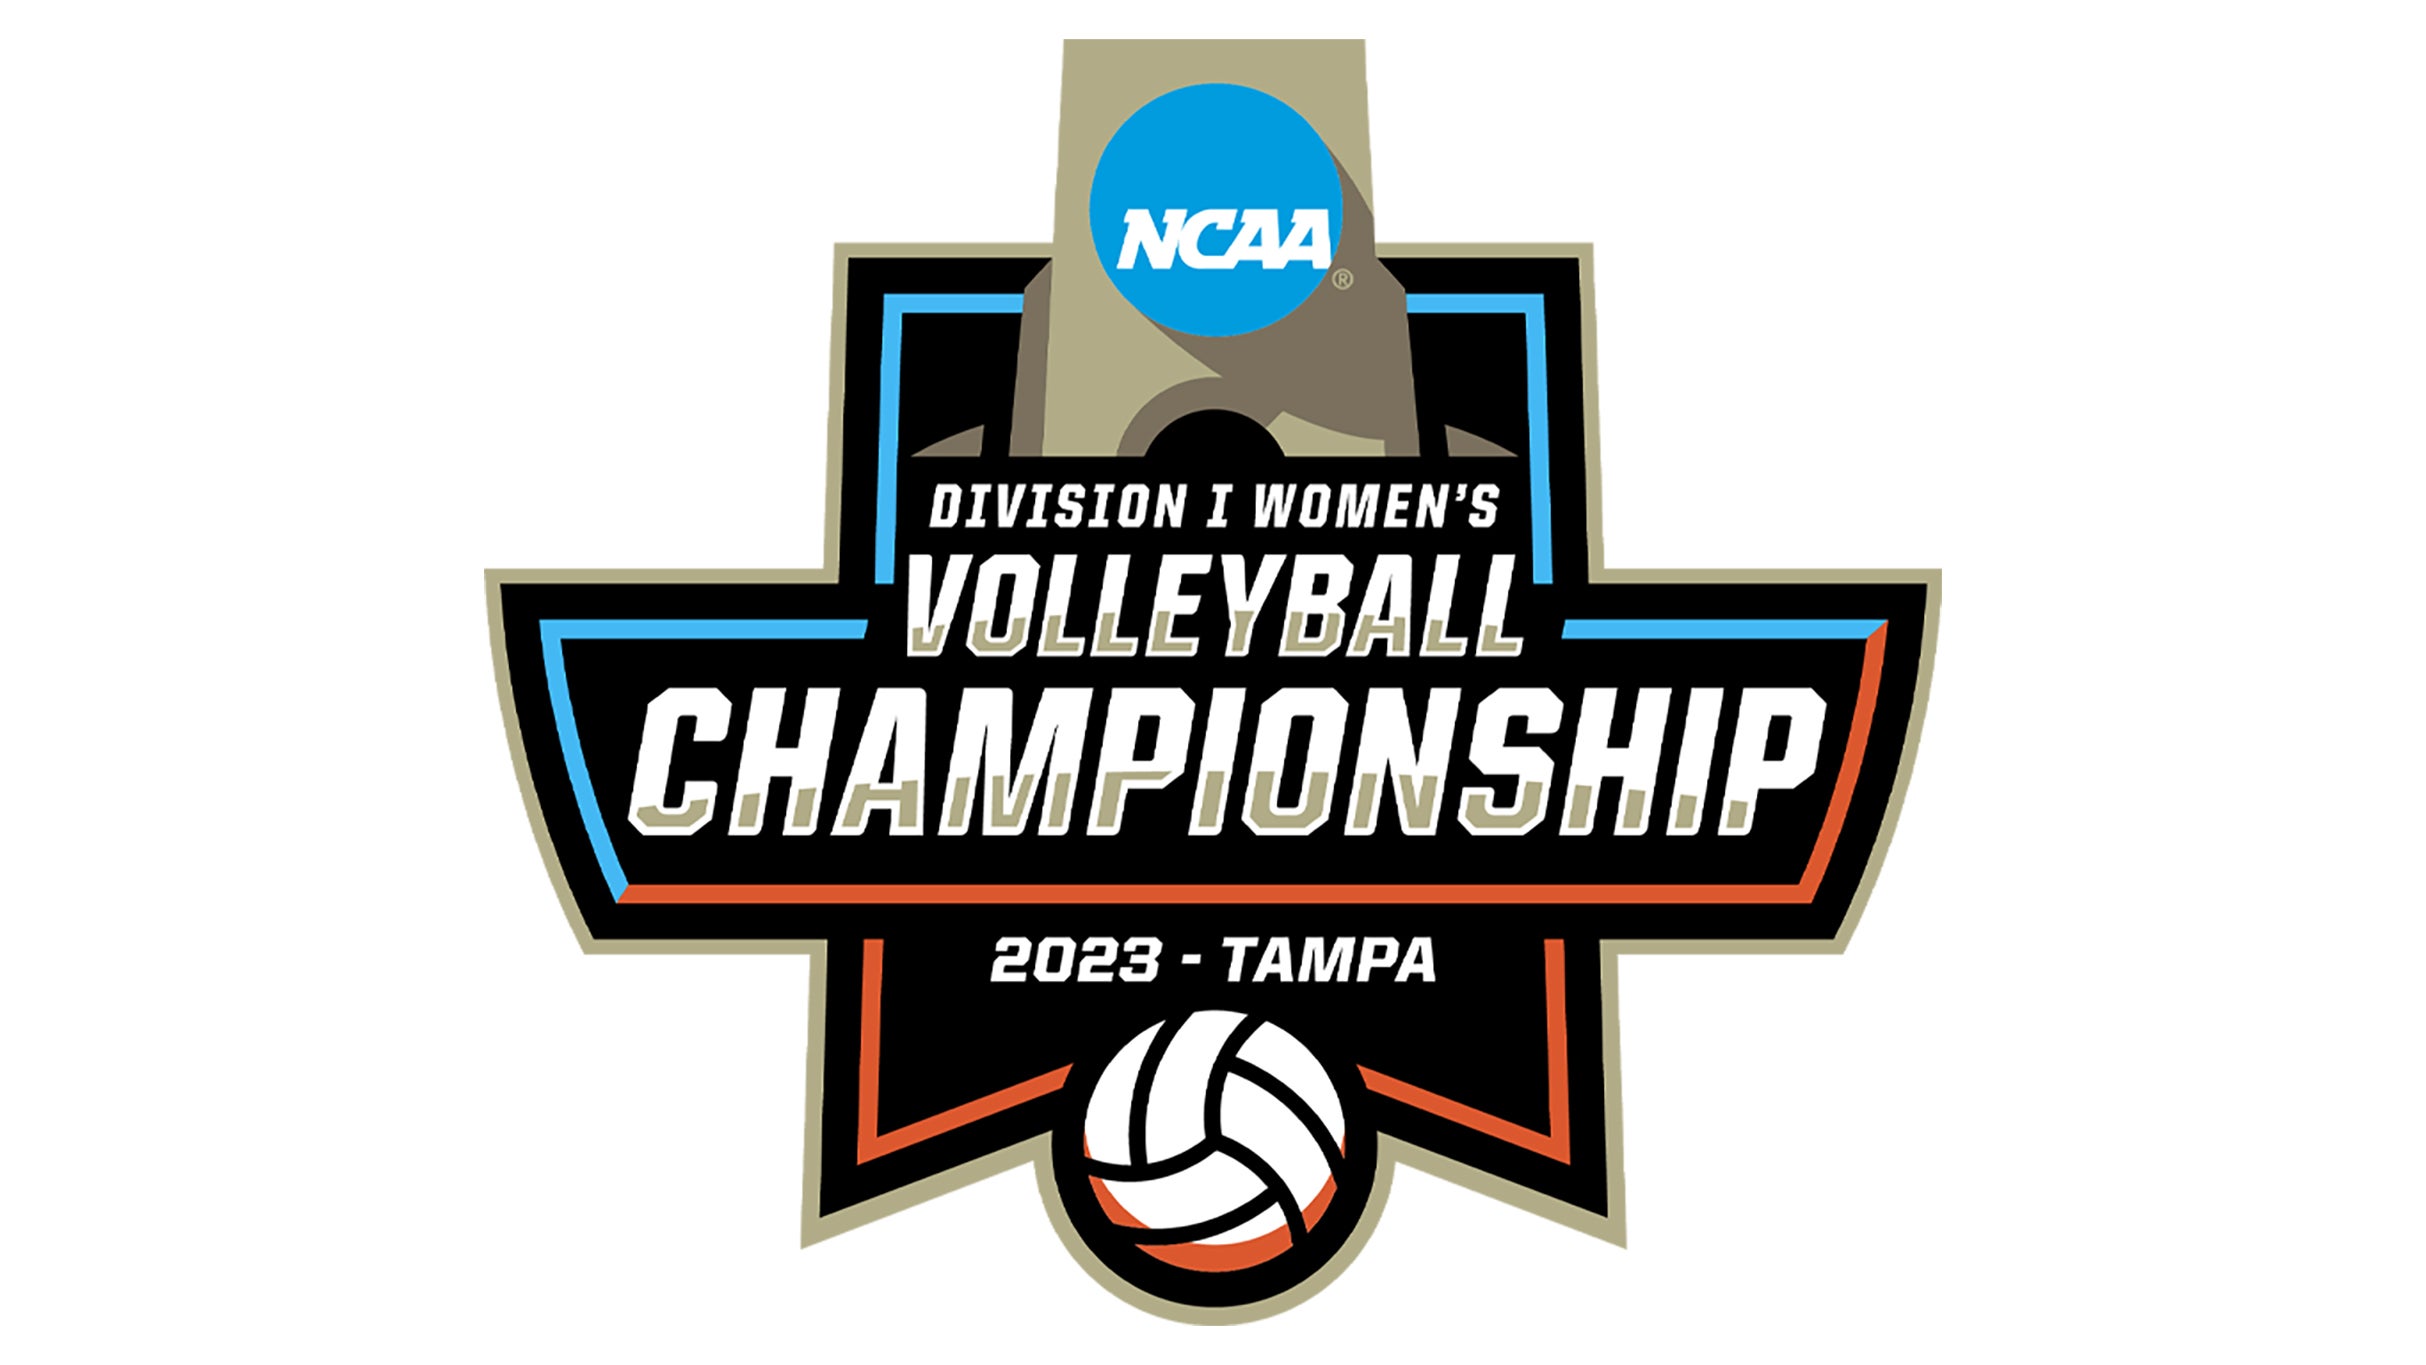 NCAA Volleyball Tournament Tickets Single Game Tickets & Schedule